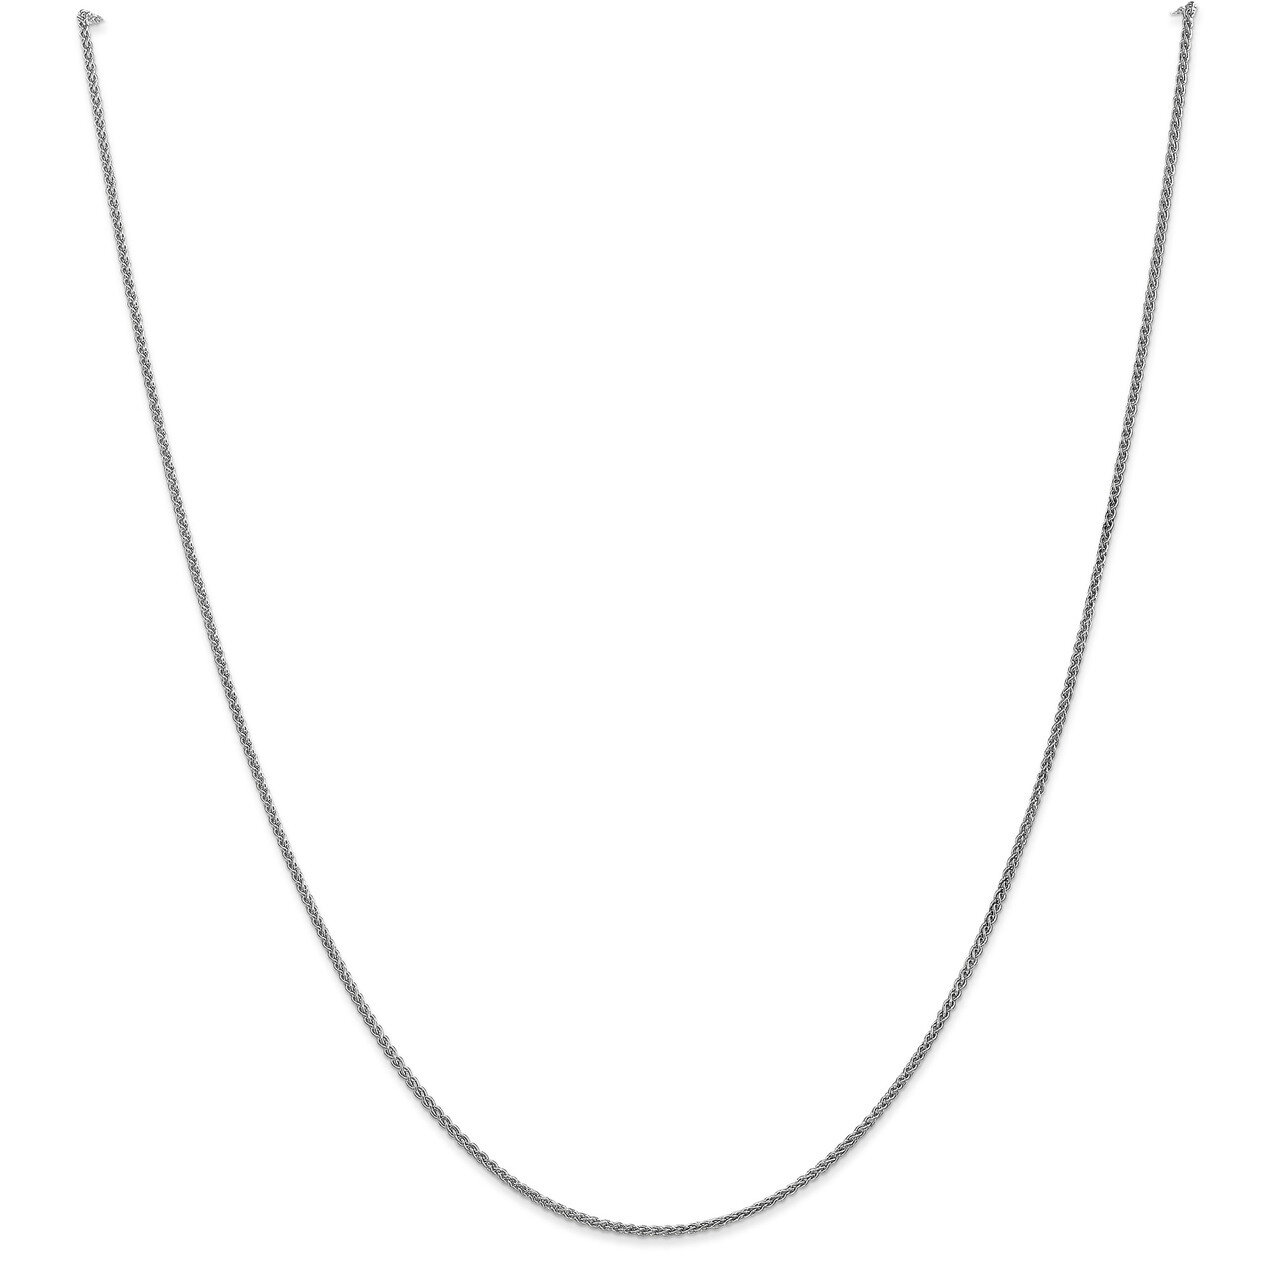 30 Inch 1.25mm Solid Polished Spiga Chain 10k White Gold 10WSP030-30